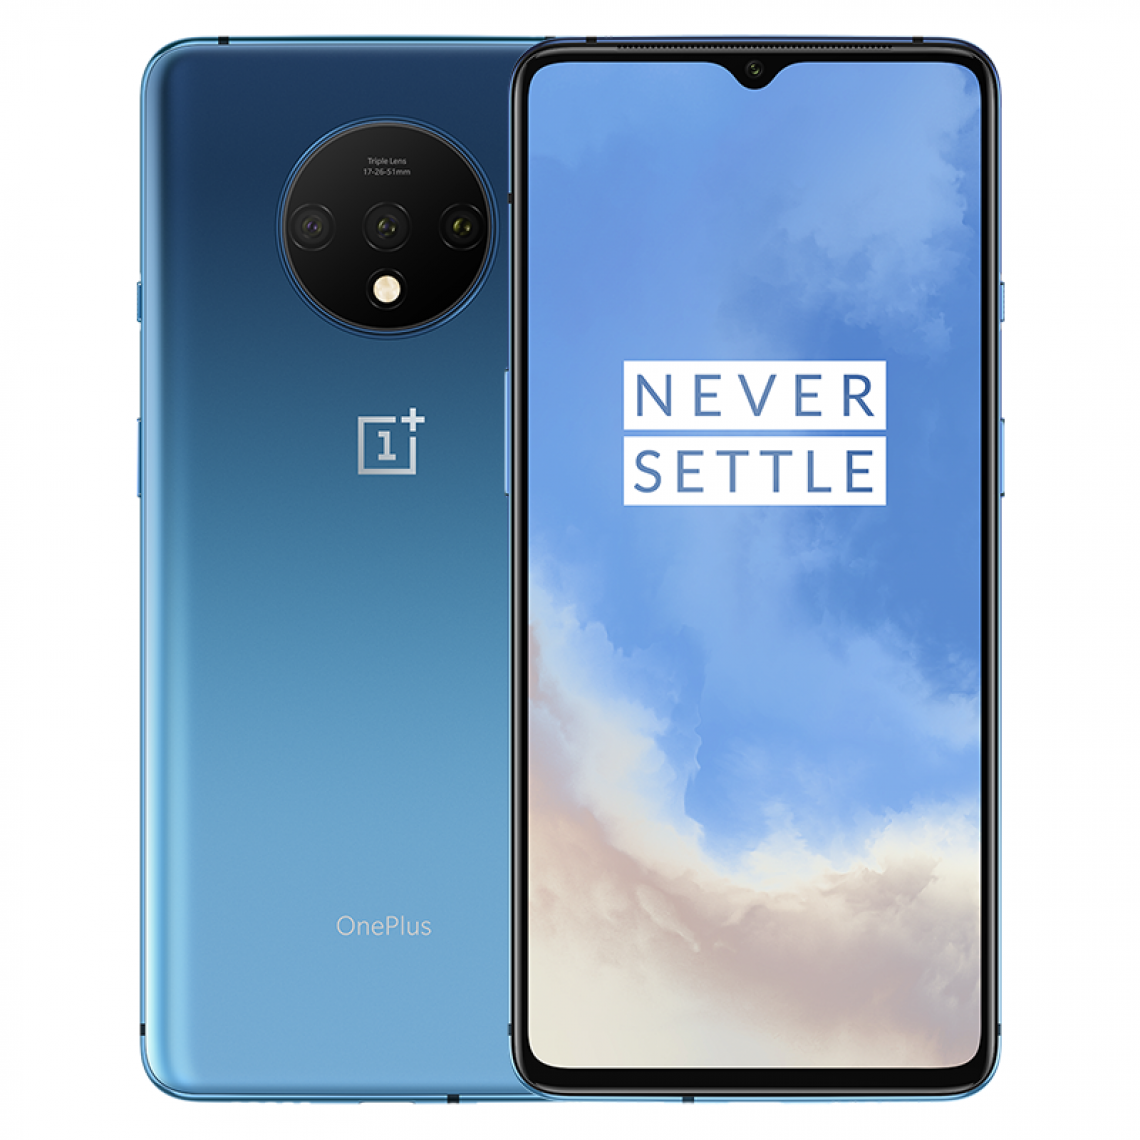 Oneplus - OnePlus 7T - Smartphone Android